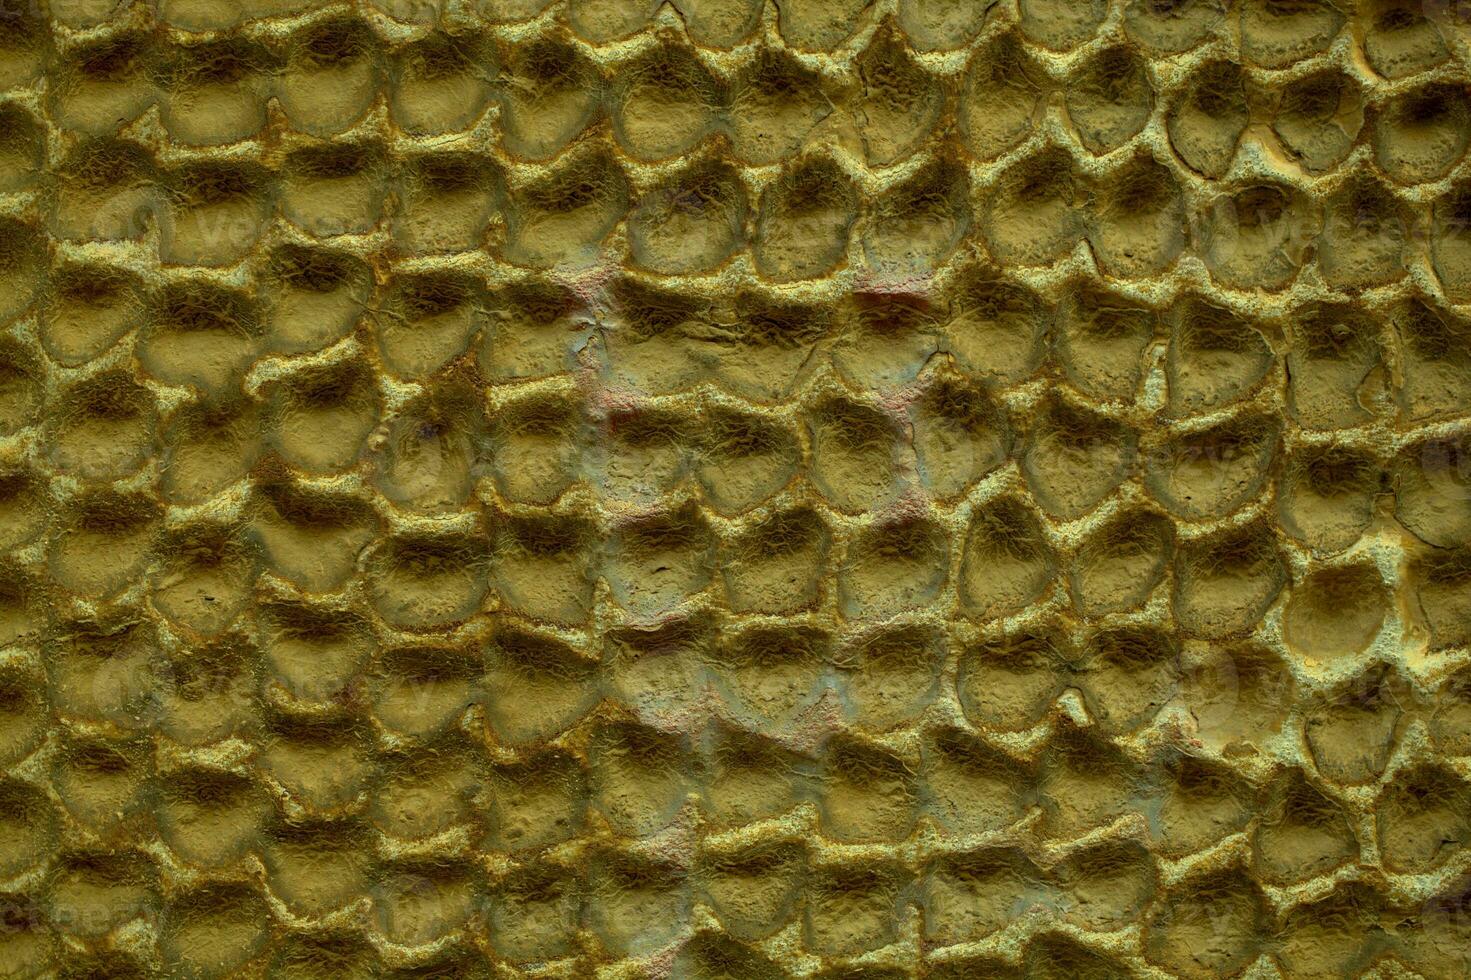 Concrete wall abstract honeycomb pattern photo